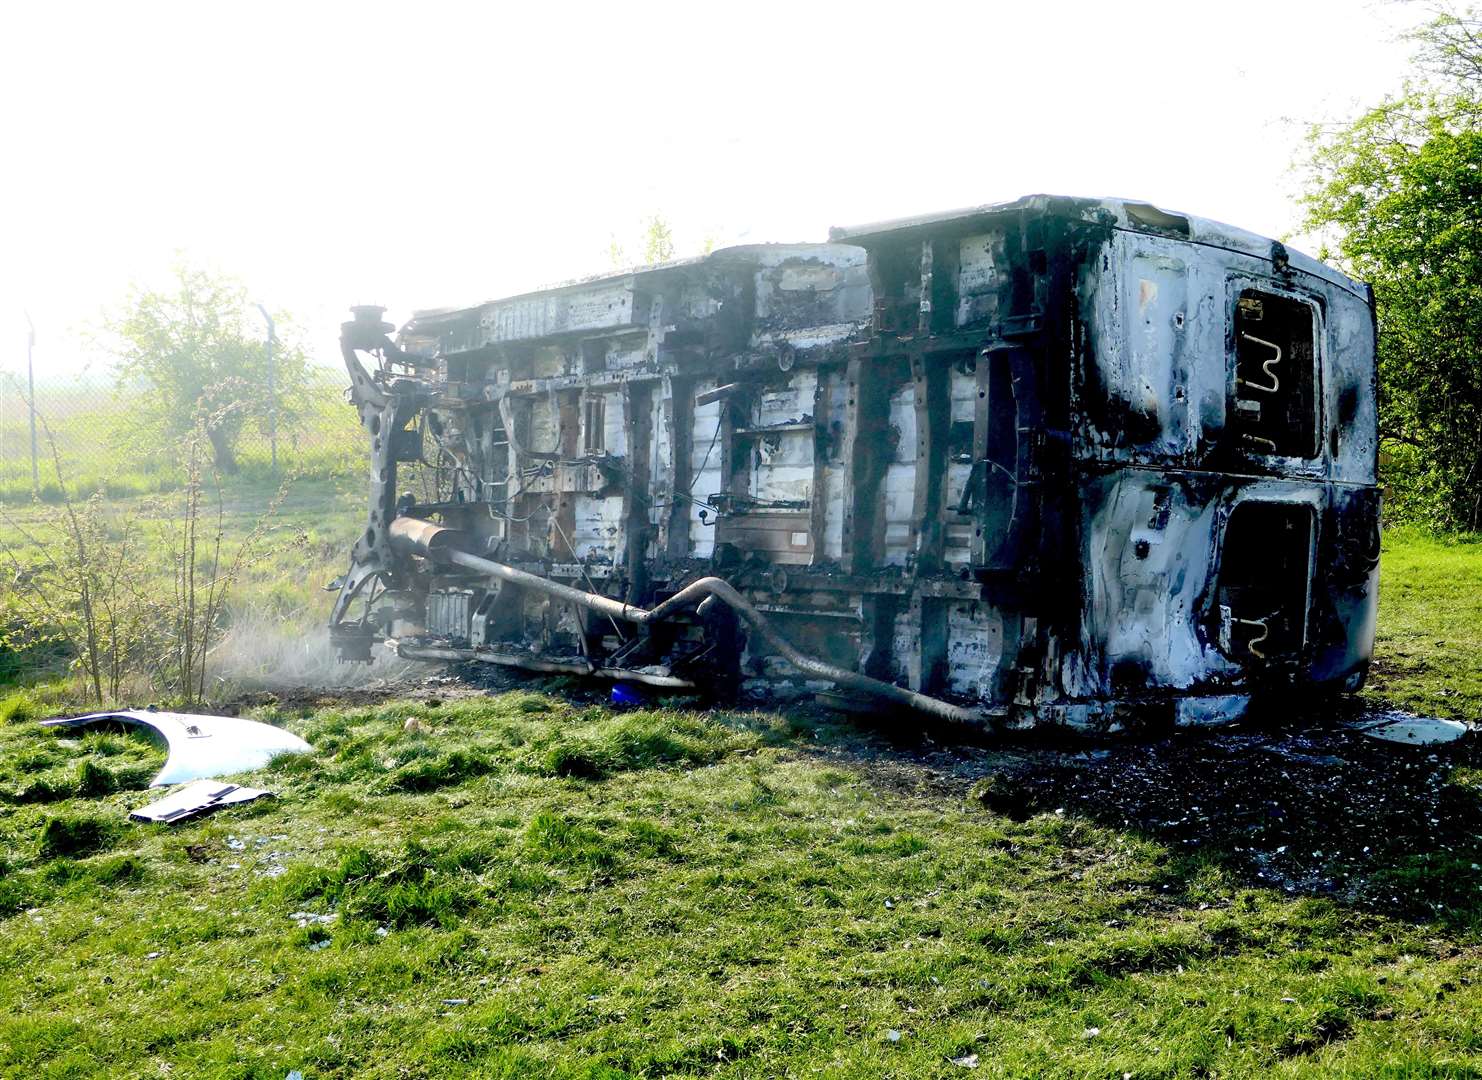 A burnt-out bus found on land near Wharf Road, Gravesend (8665521)